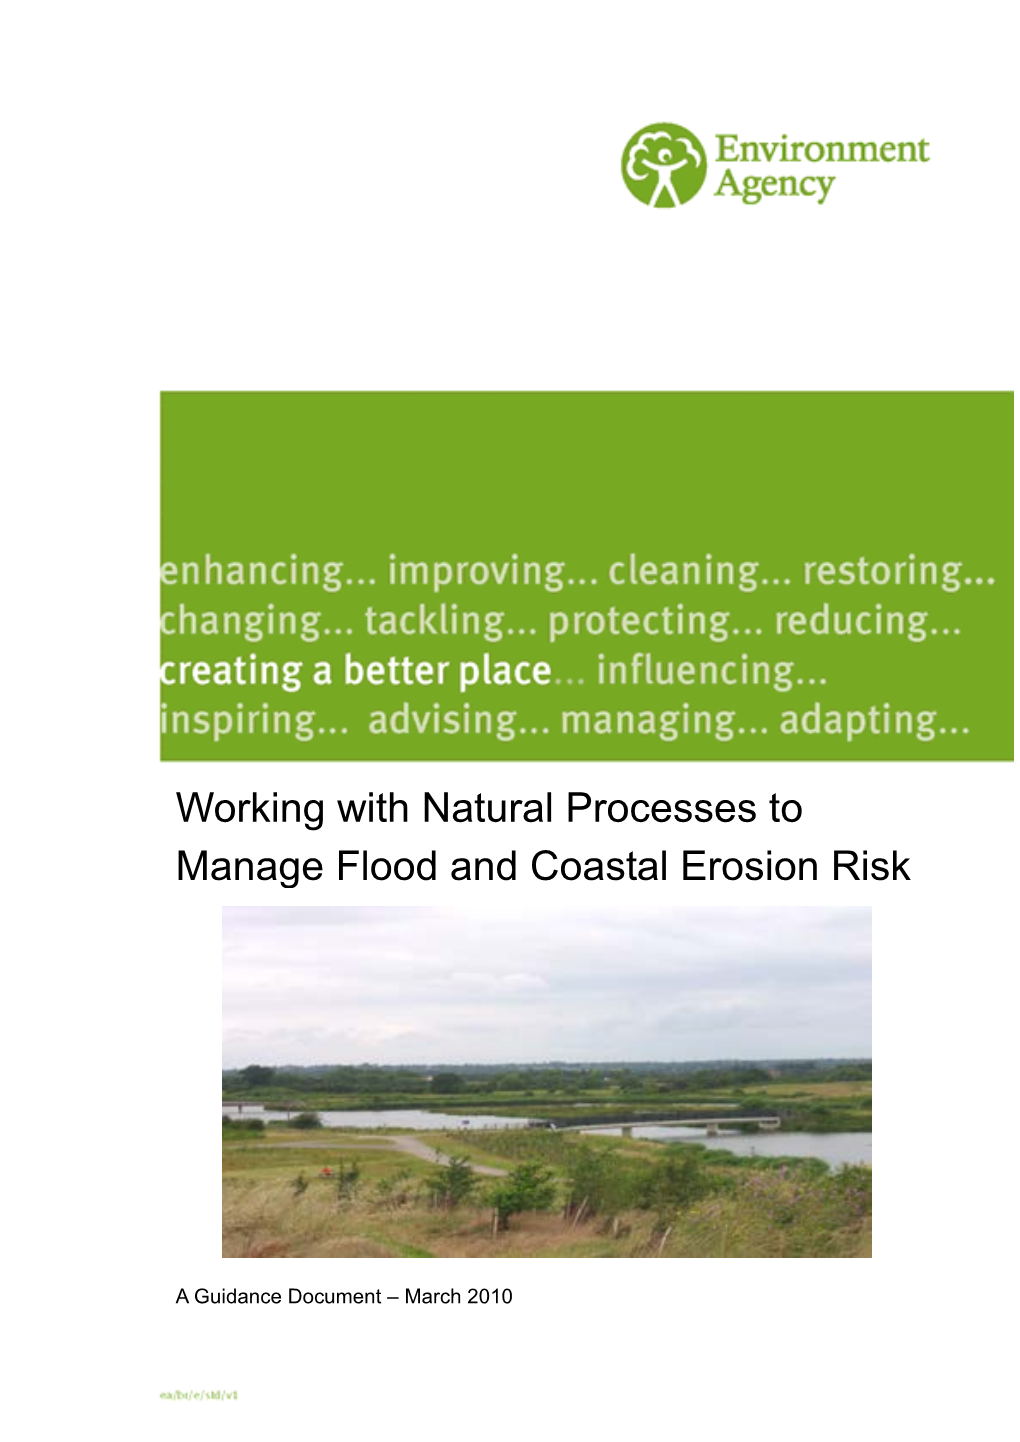 Working with Natural Processes to Manage Flood and Coastal Erosion Risk